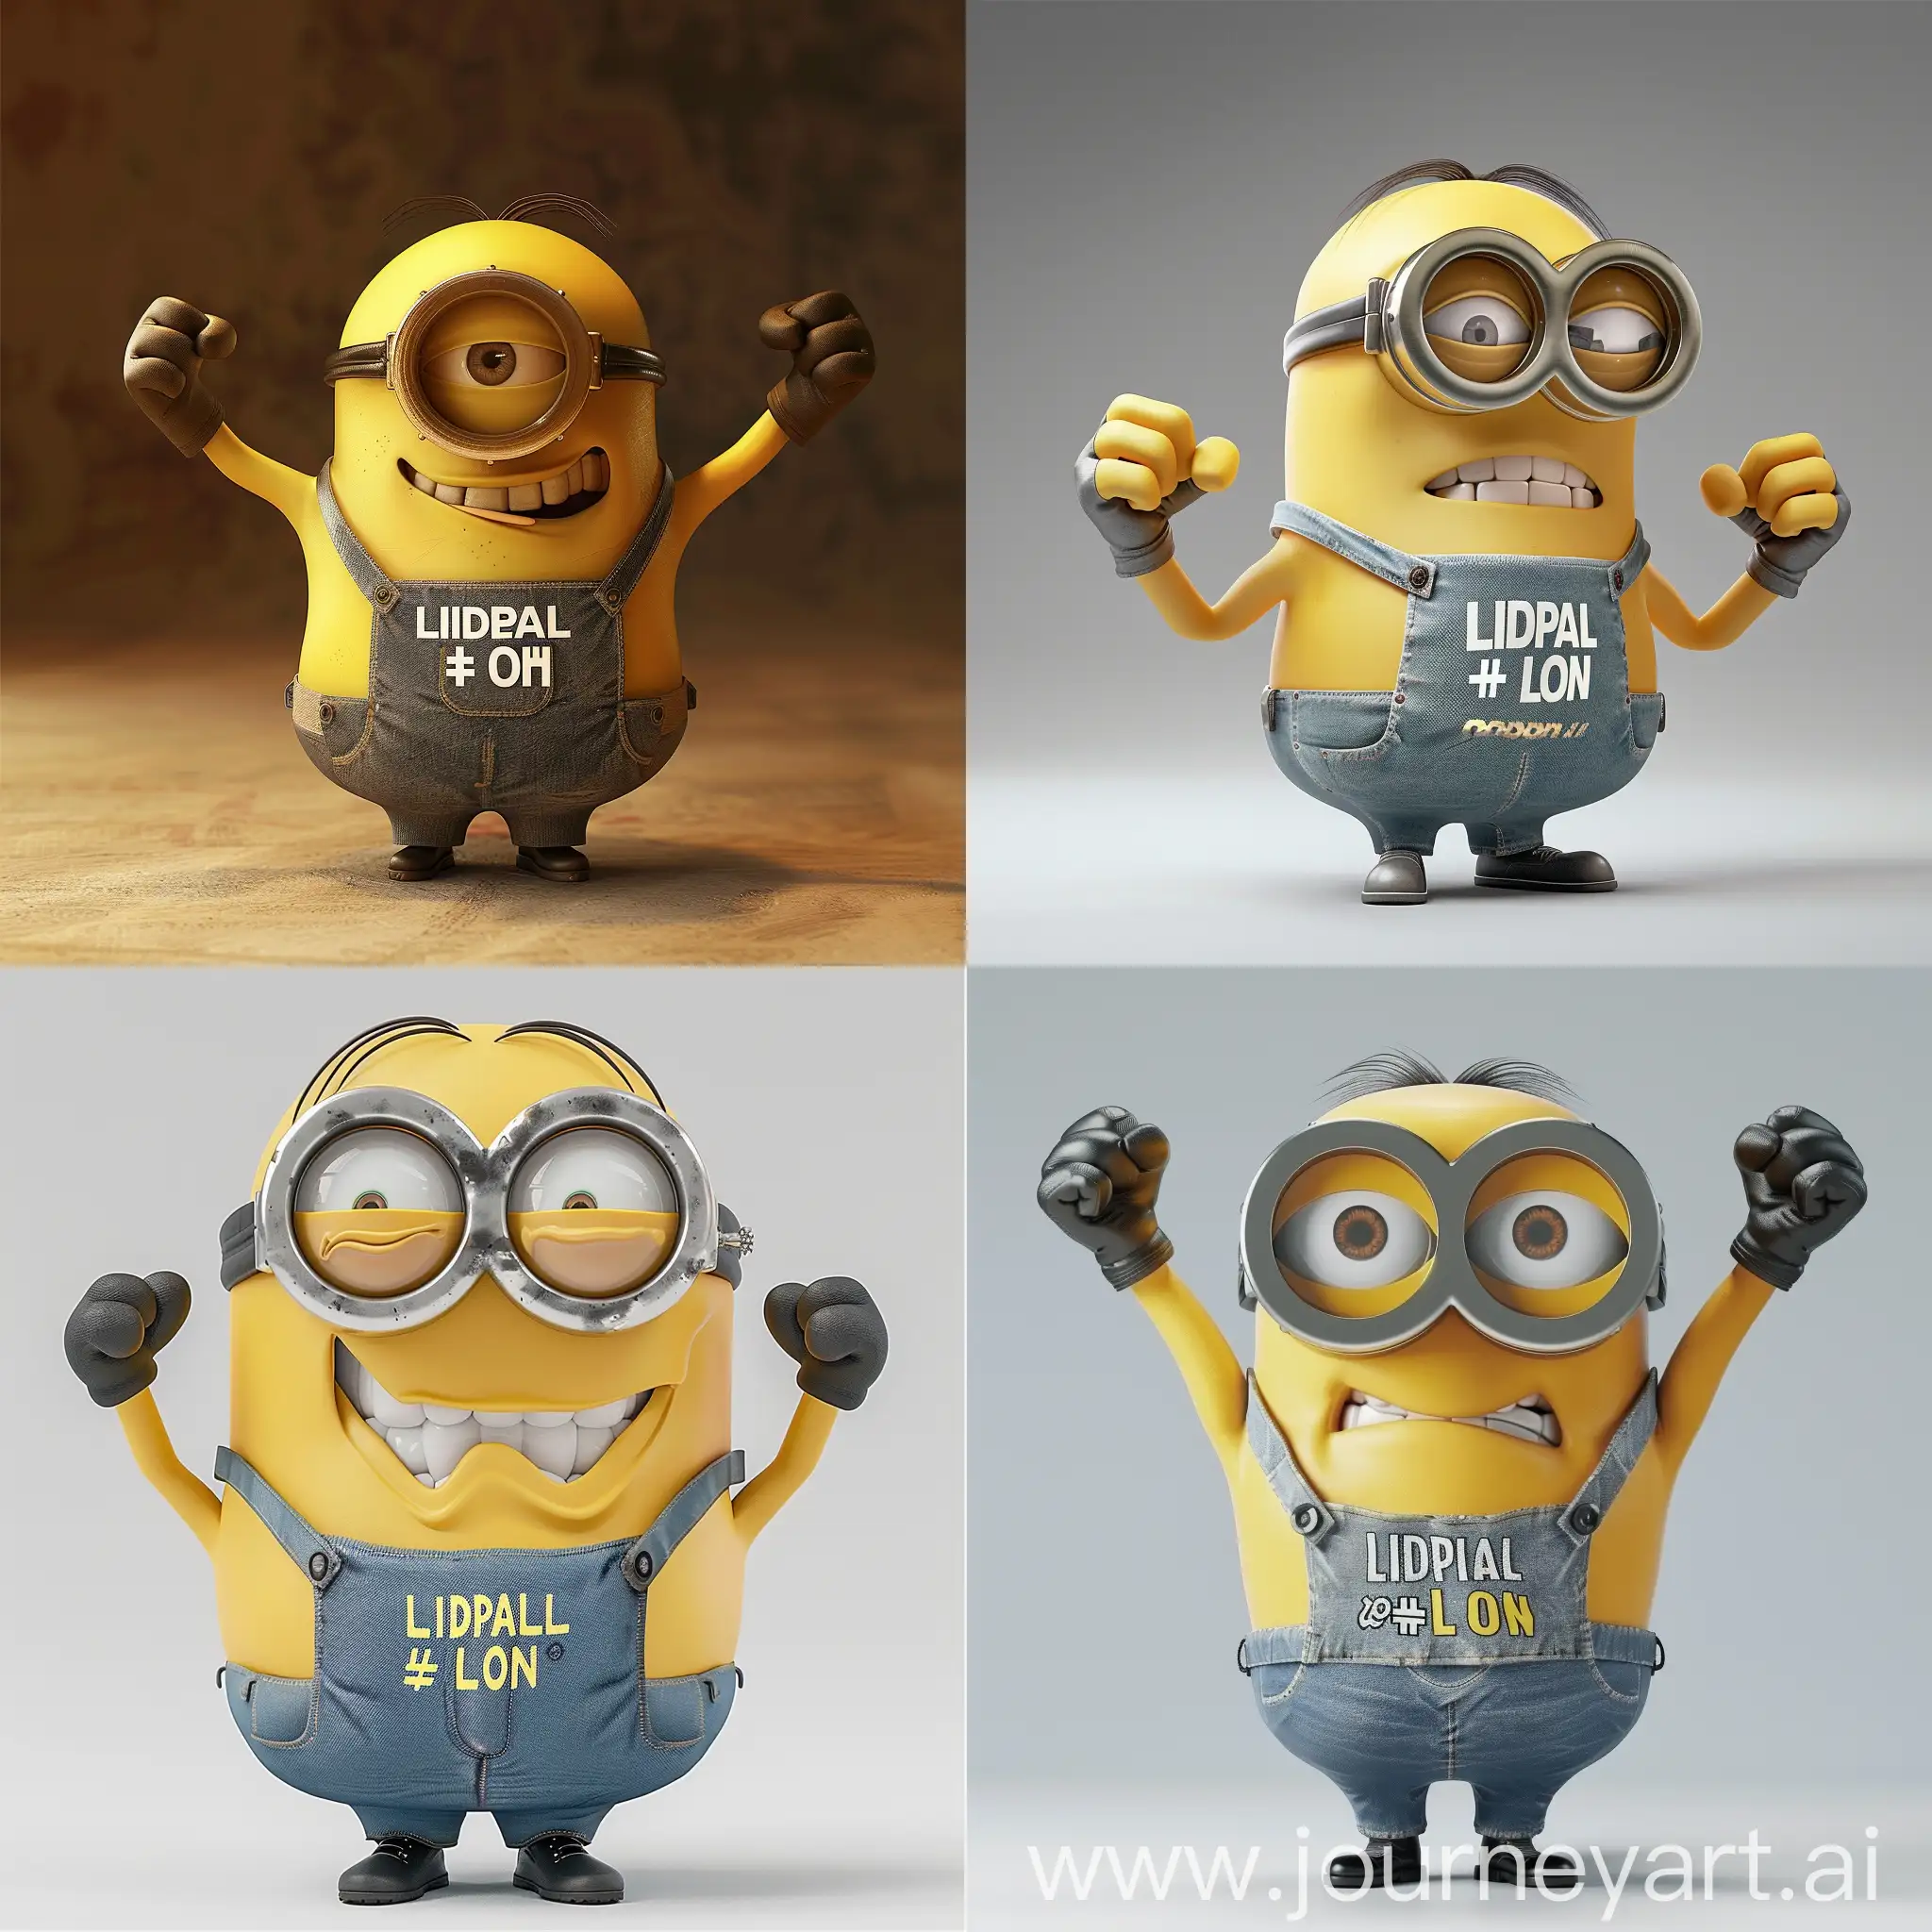 A very strong minion with big muscles with a T-shirt that says "Liberal = loh"